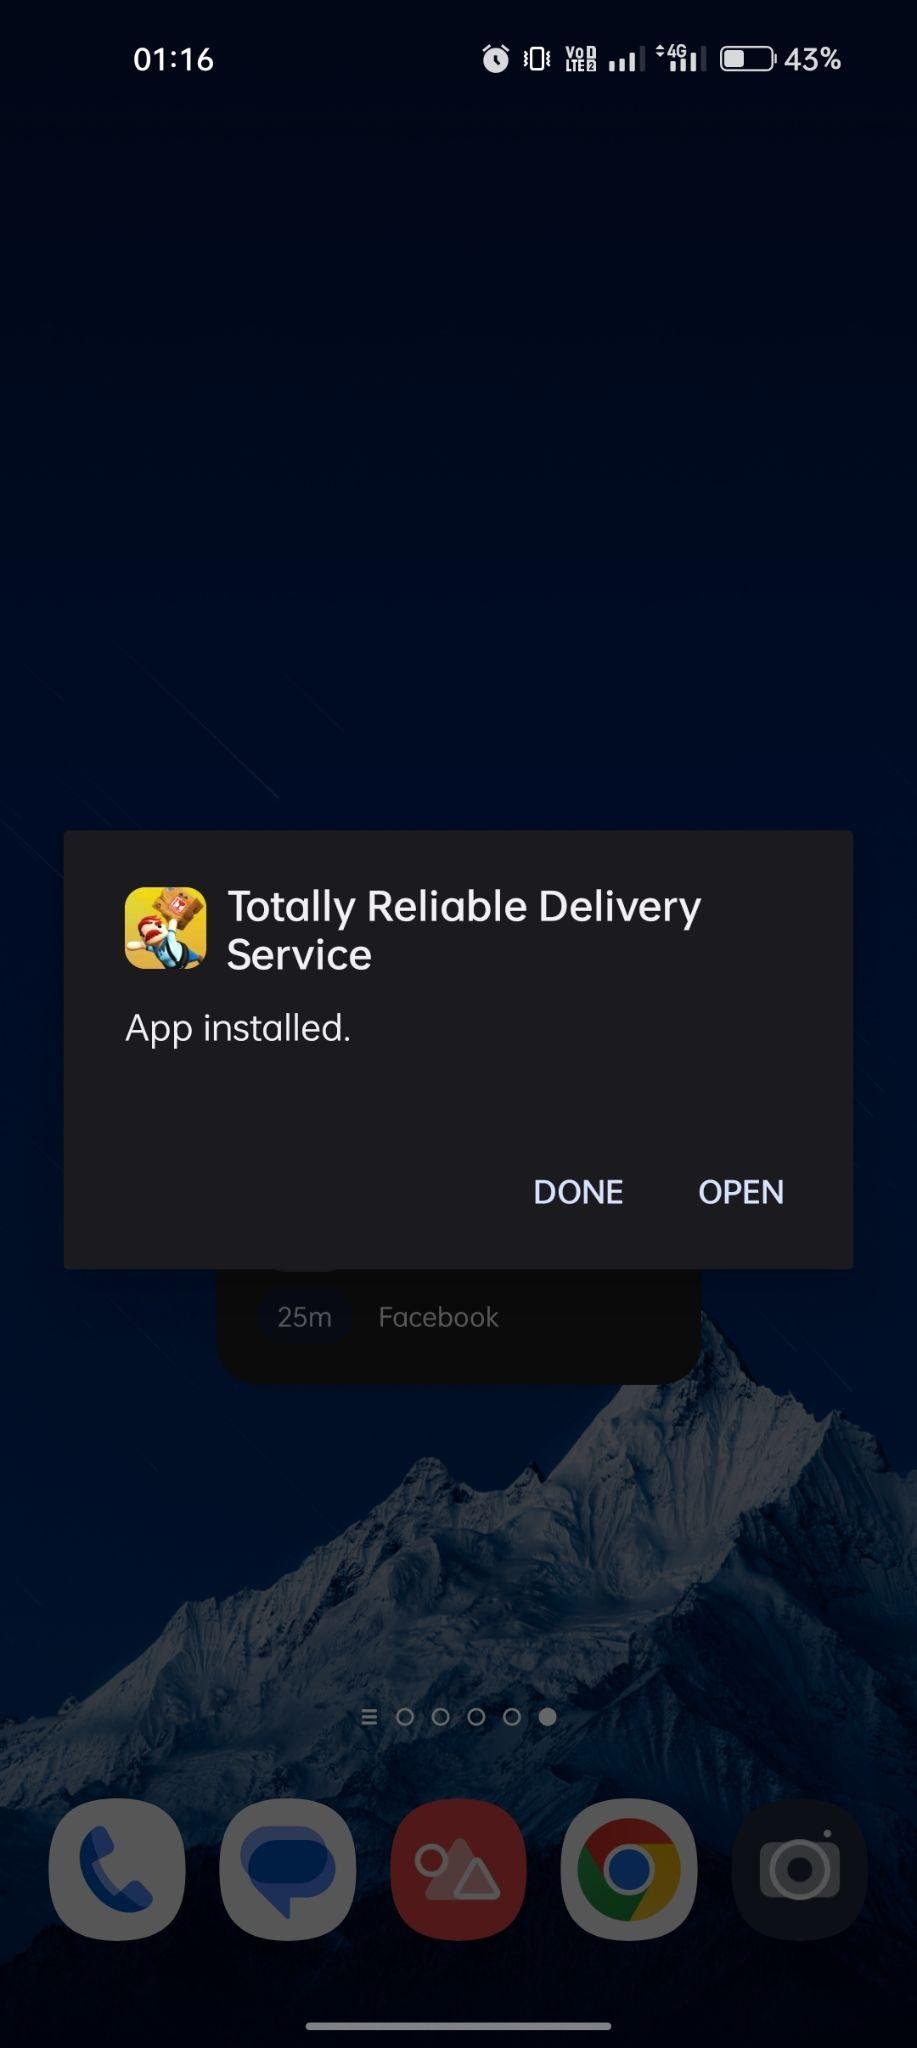 Totally Reliable Delivery Service apk installed 